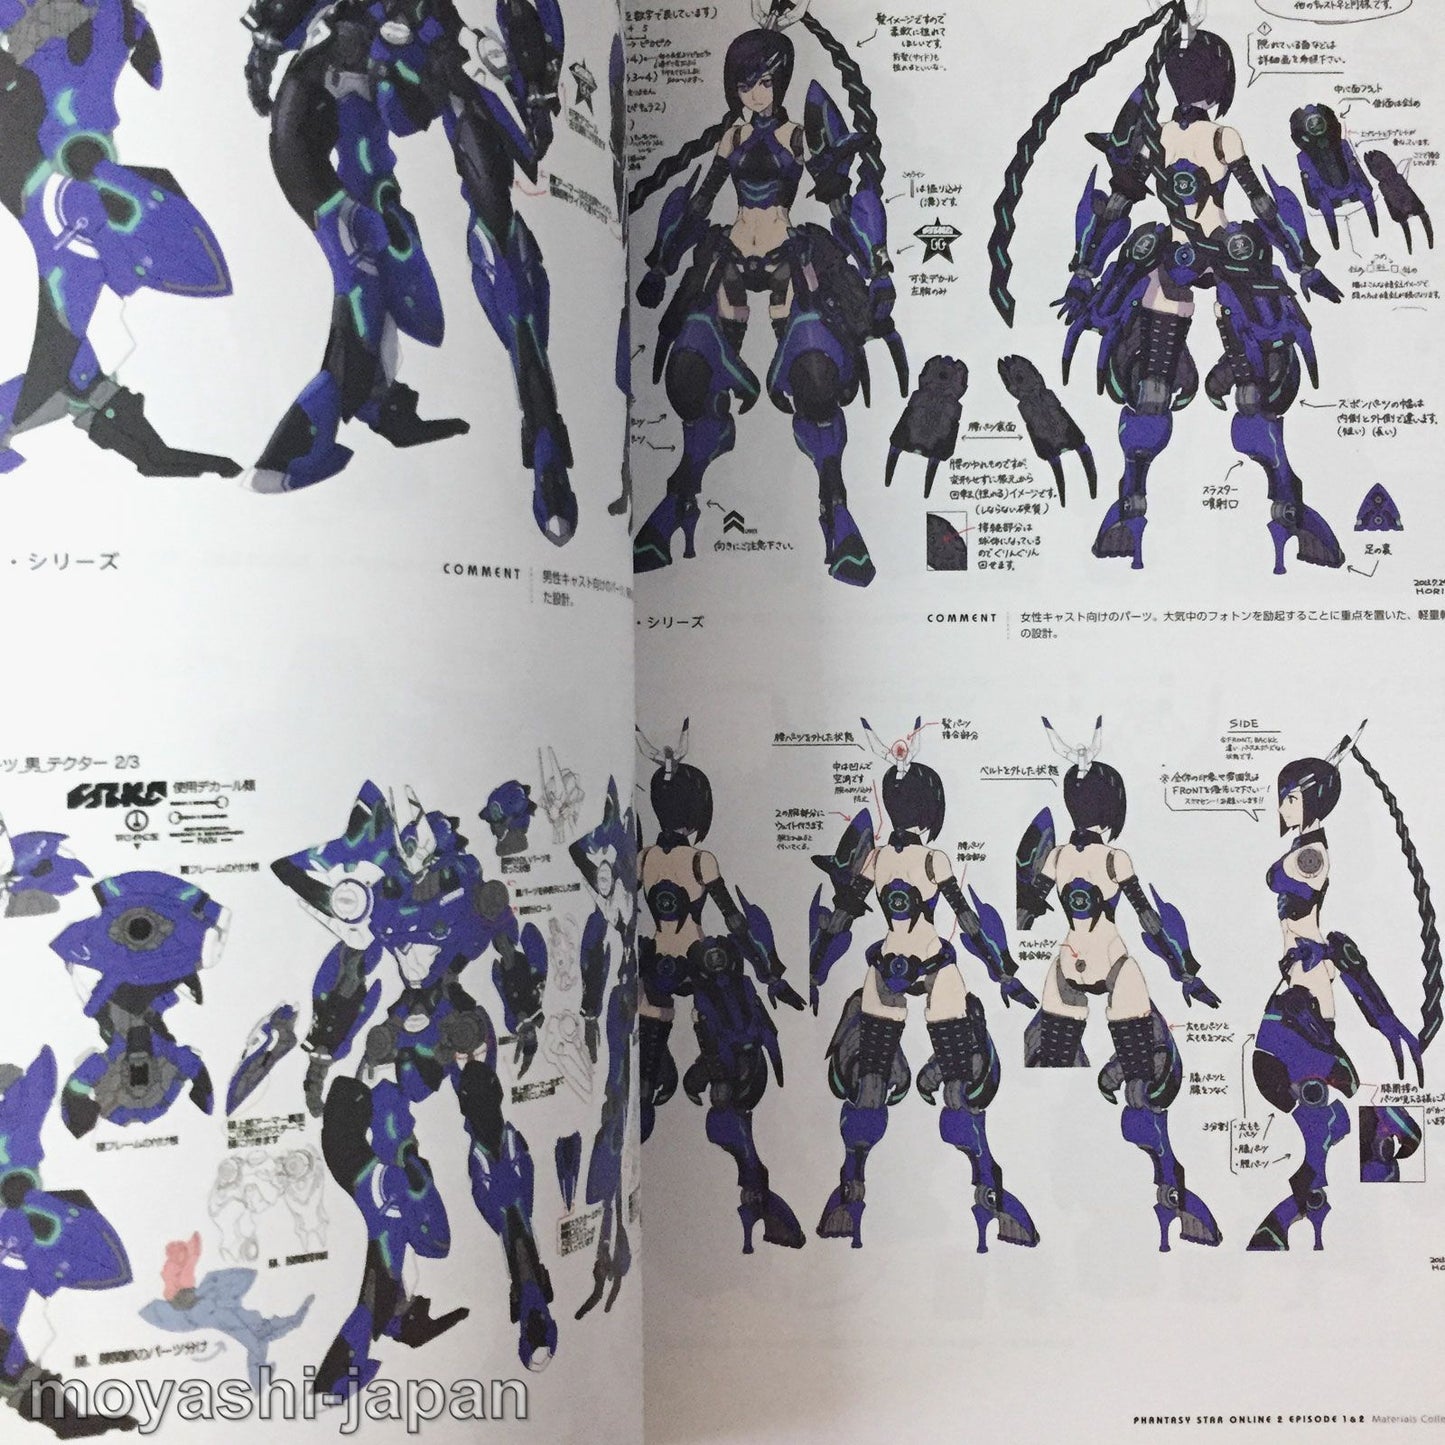 Phantasy Star Online 2 Episode 1&2 Material Collection